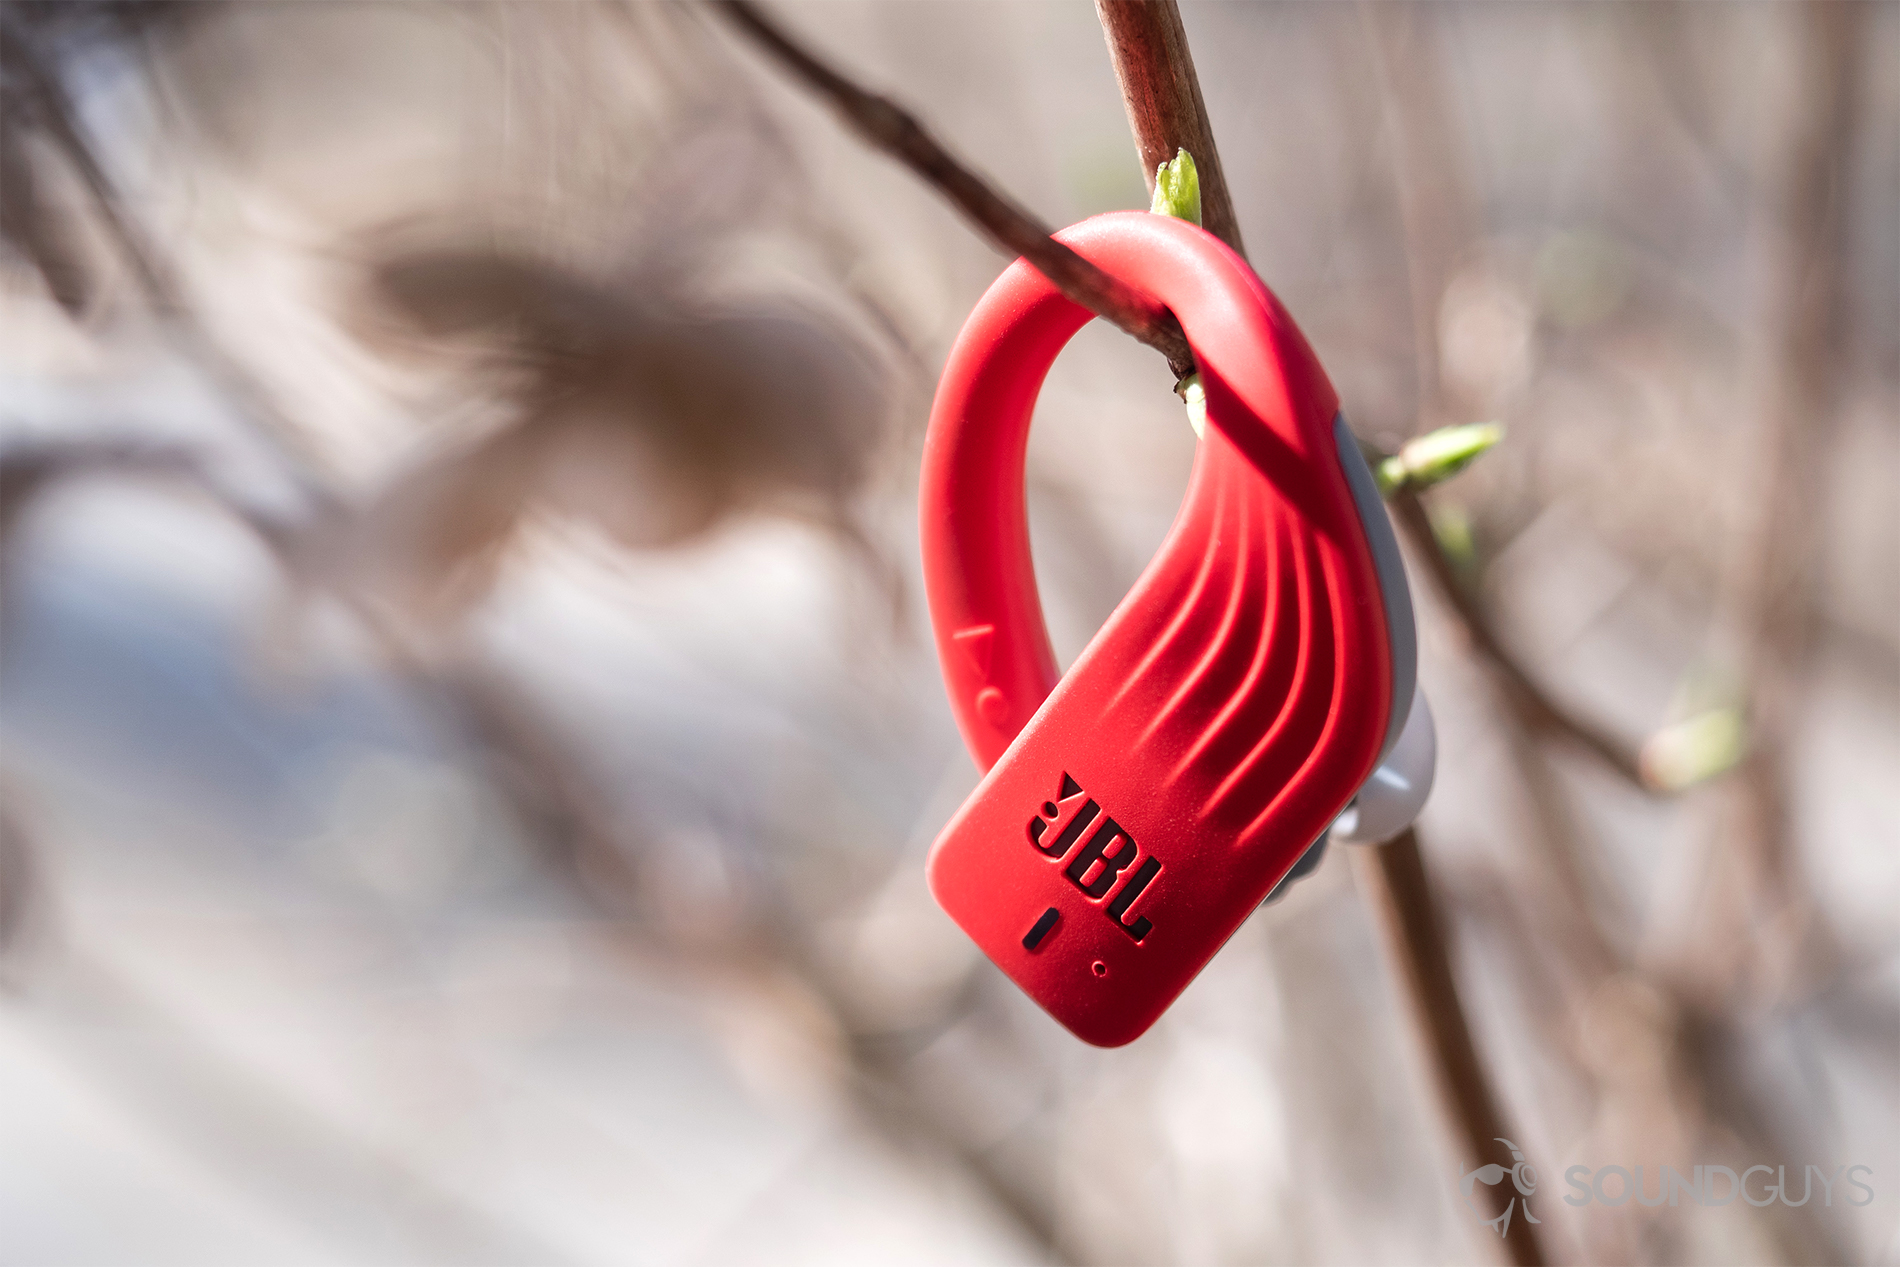 JBL Endurance Peak: Focus image of the right earbud dangling from branches.